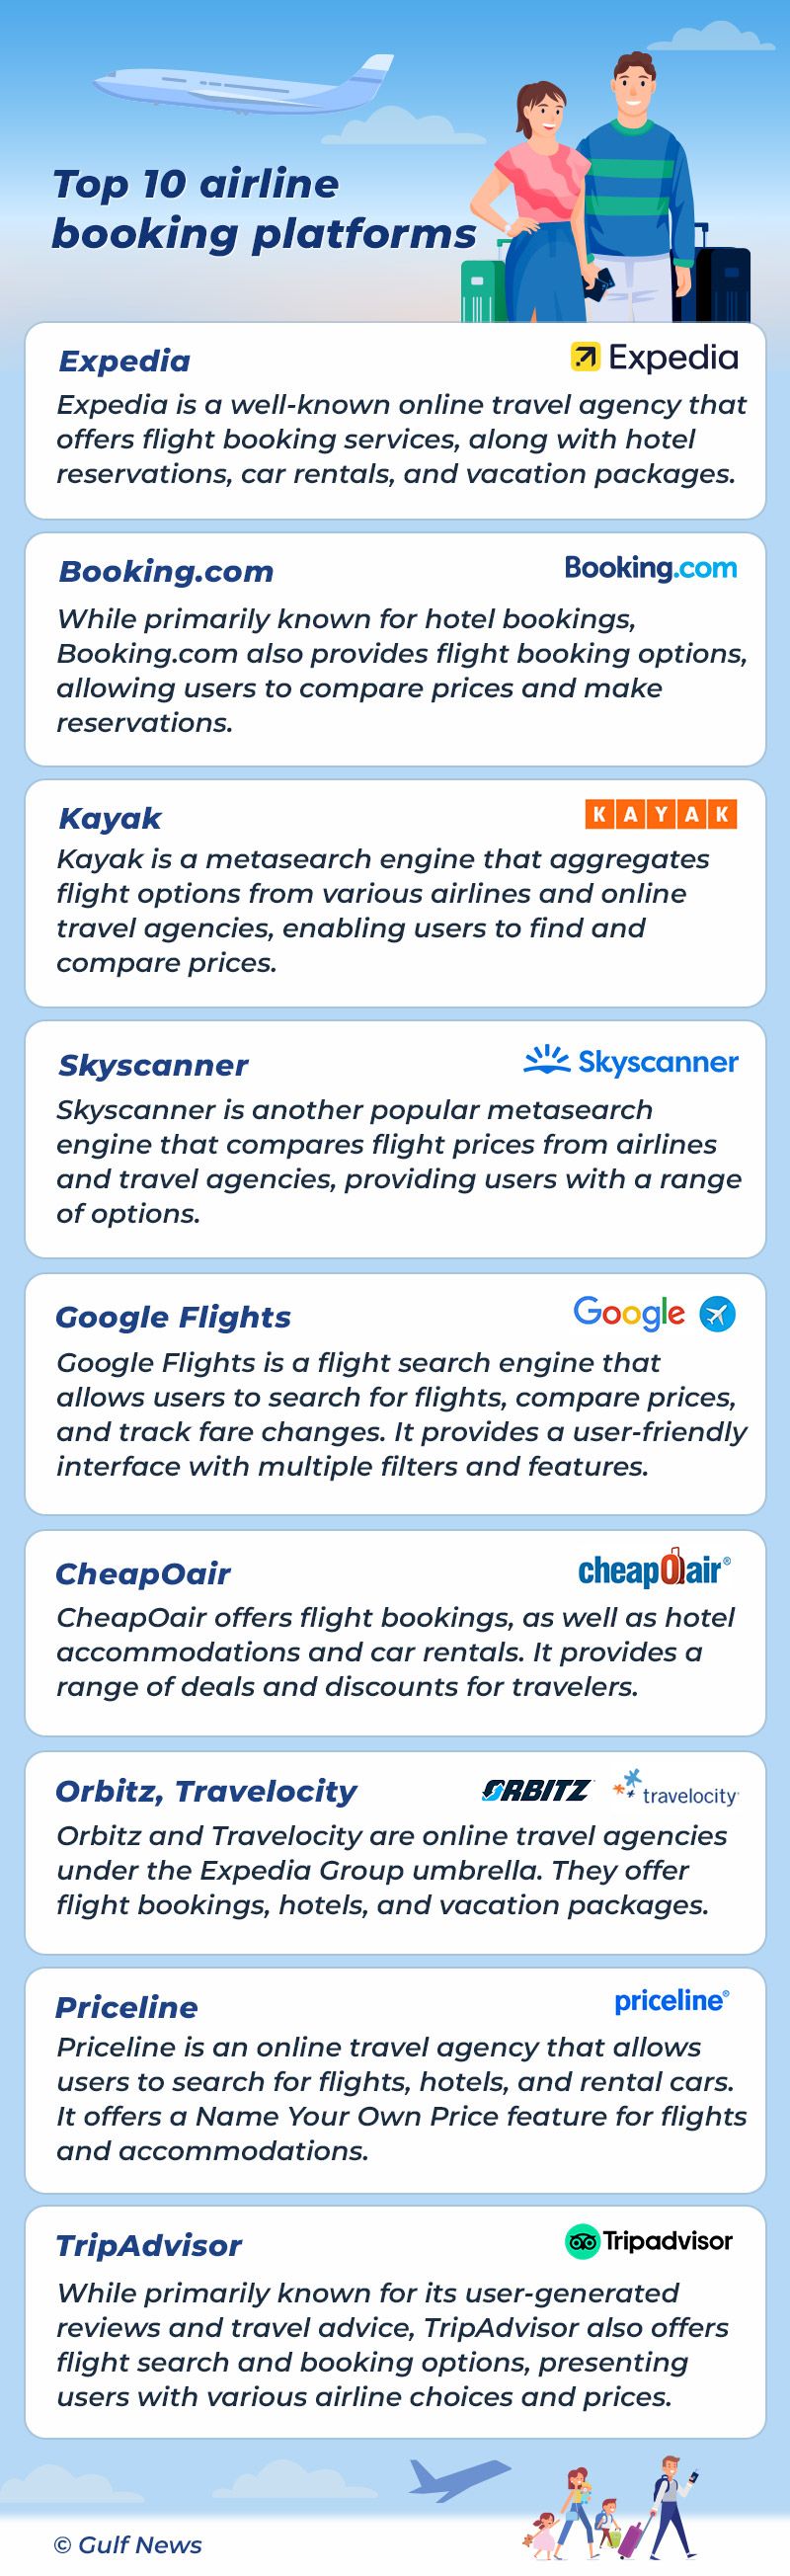 Top 10 airline booking sites